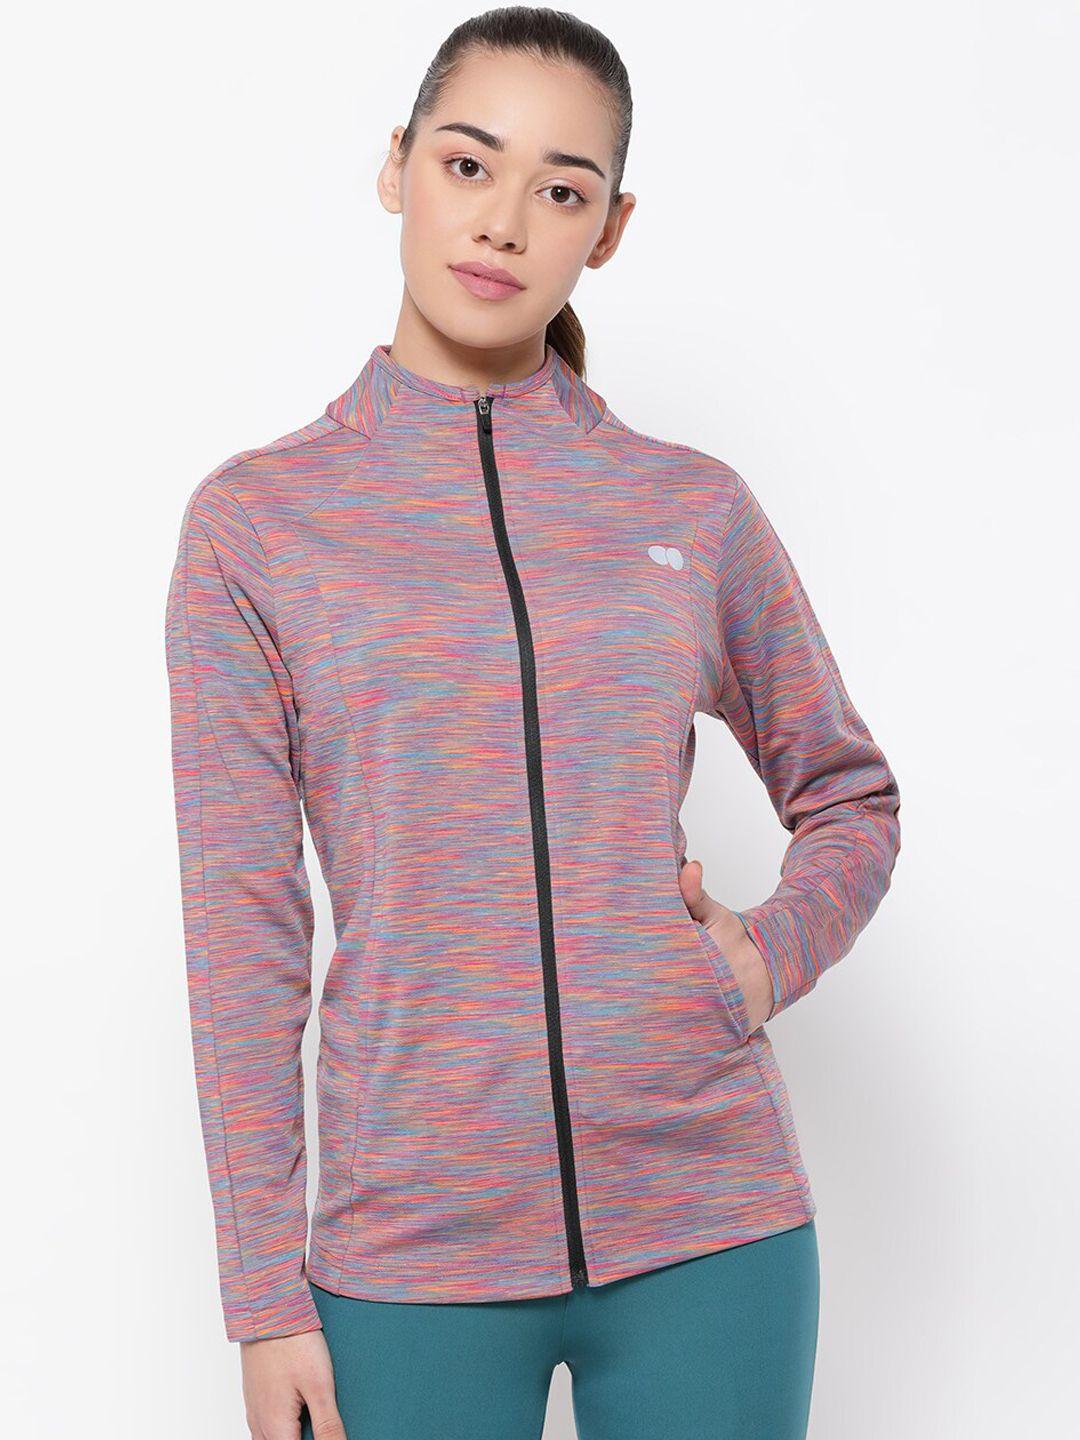 clovia pink & blue abstract printed lightweight sporty jacket